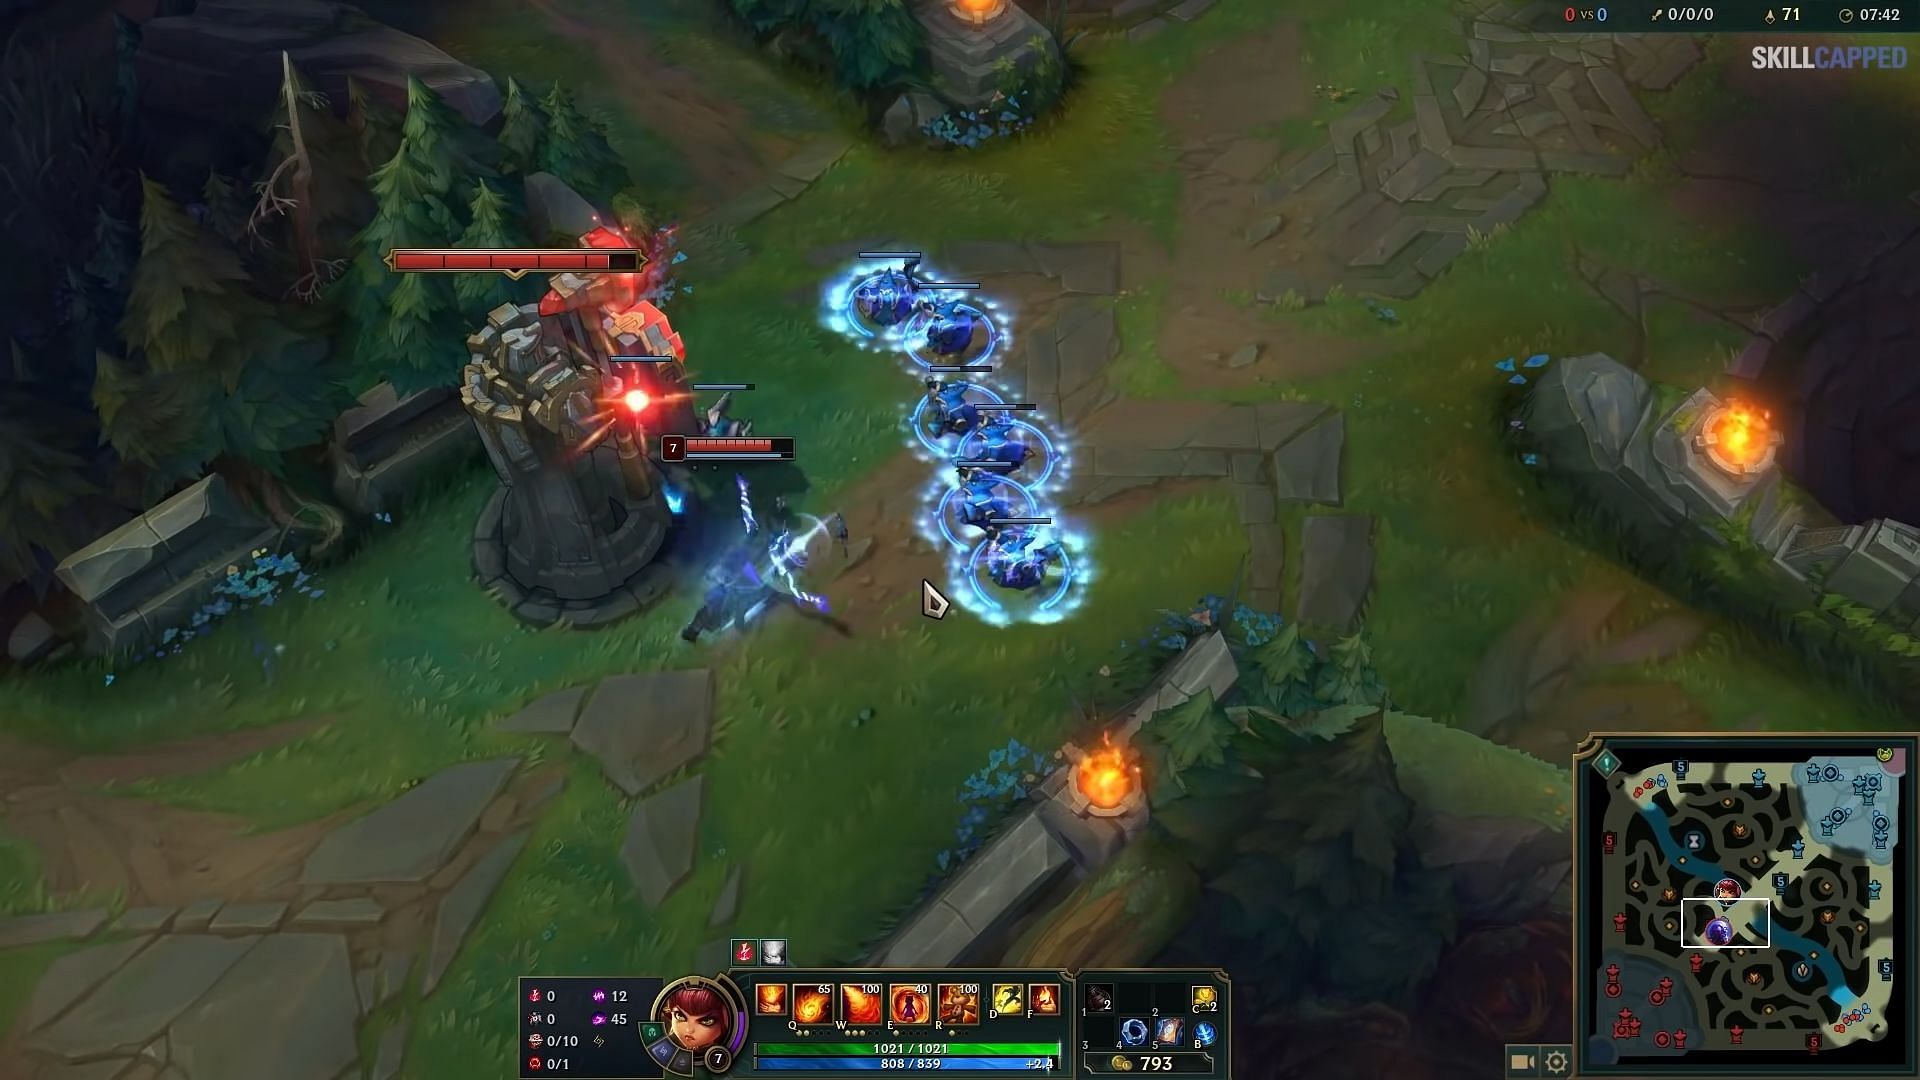 Crashing waves in League of Legends can backfire as it can allow the enemy to gain back the gold deficit (Image via Skill Capped/Youtube)